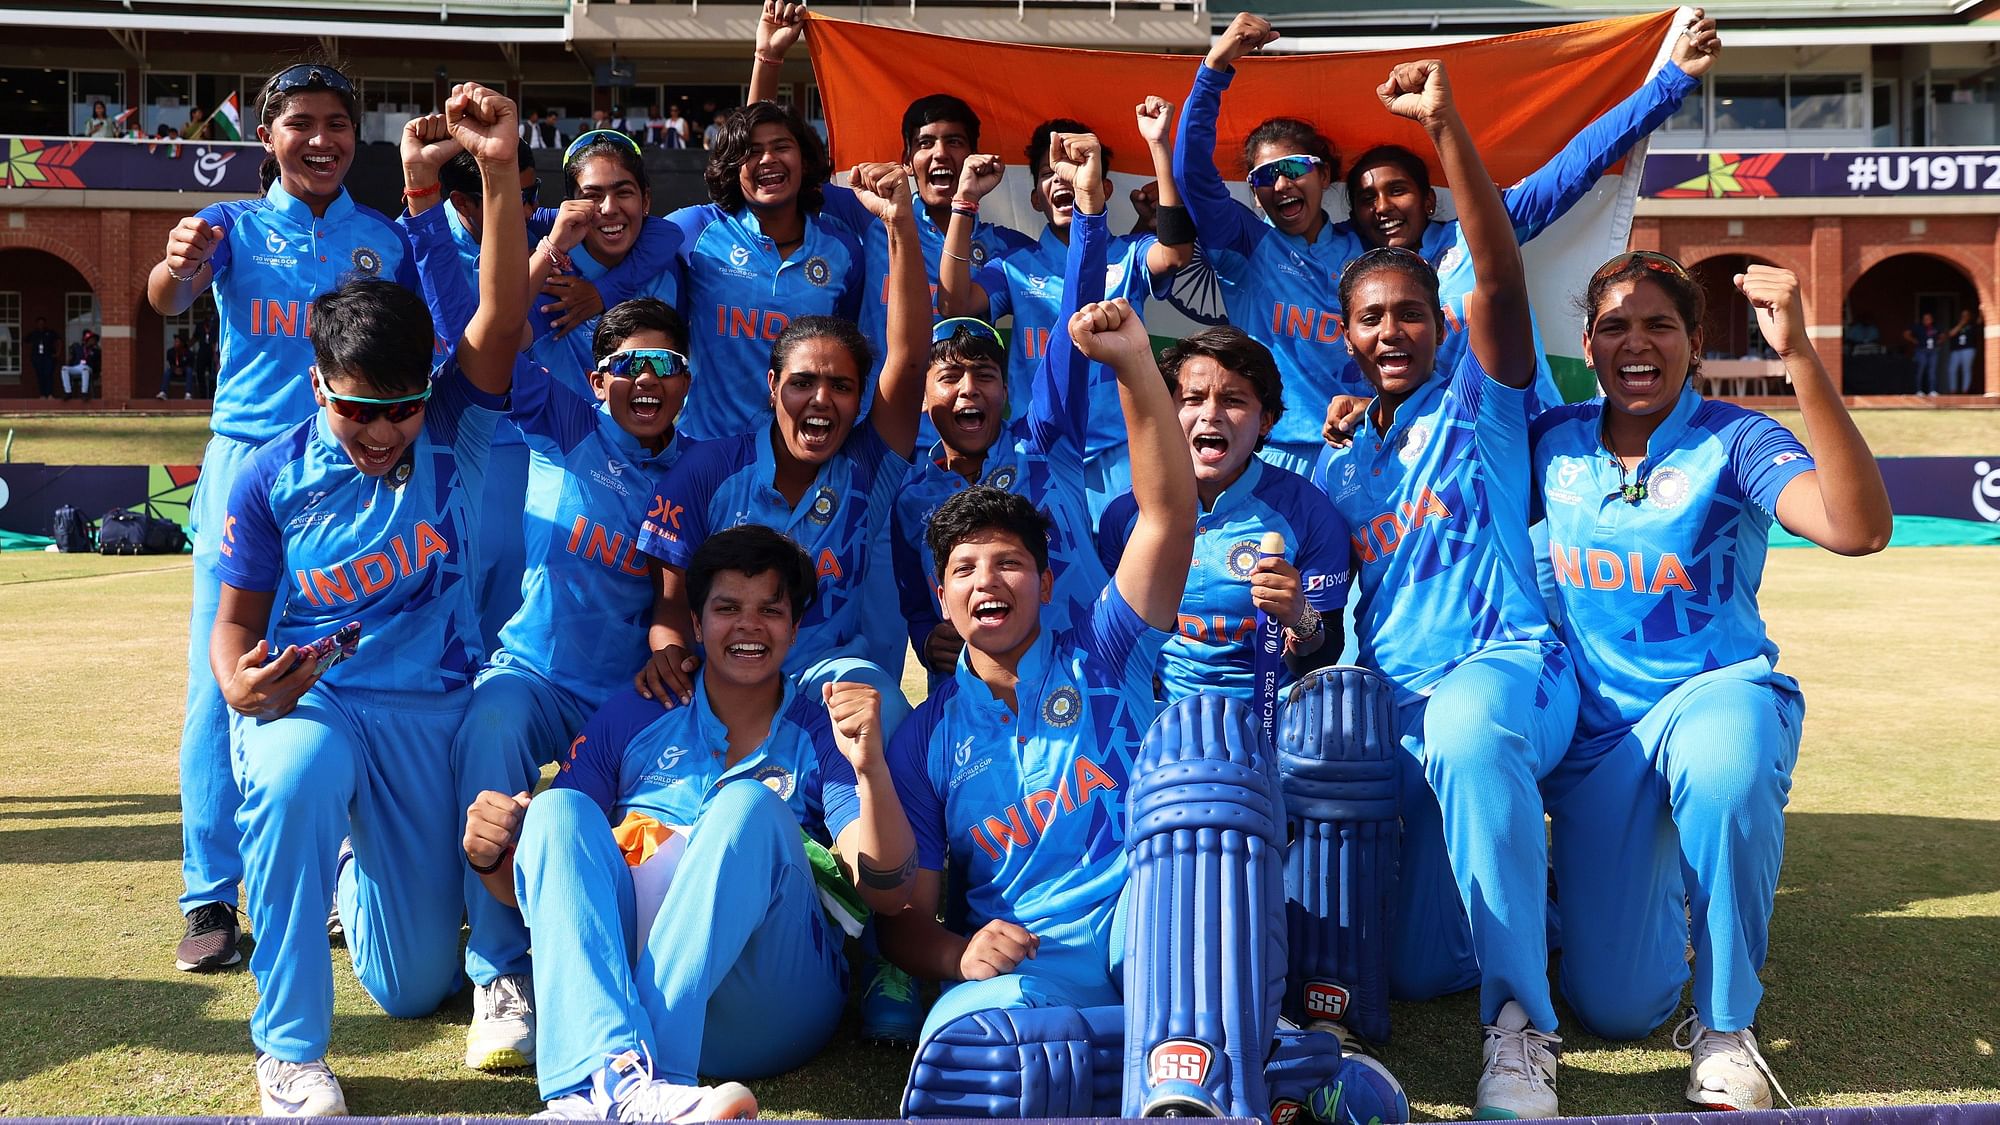 <div class="paragraphs"><p>Players of India celebrate after winning the ICC Women's U19 T20 World Cup following the ICC Women's U19 T20 World Cup 2023 Final match between India and England at JB Marks Oval on January 29, 2023 in Potchefstroom, South Africa</p></div>